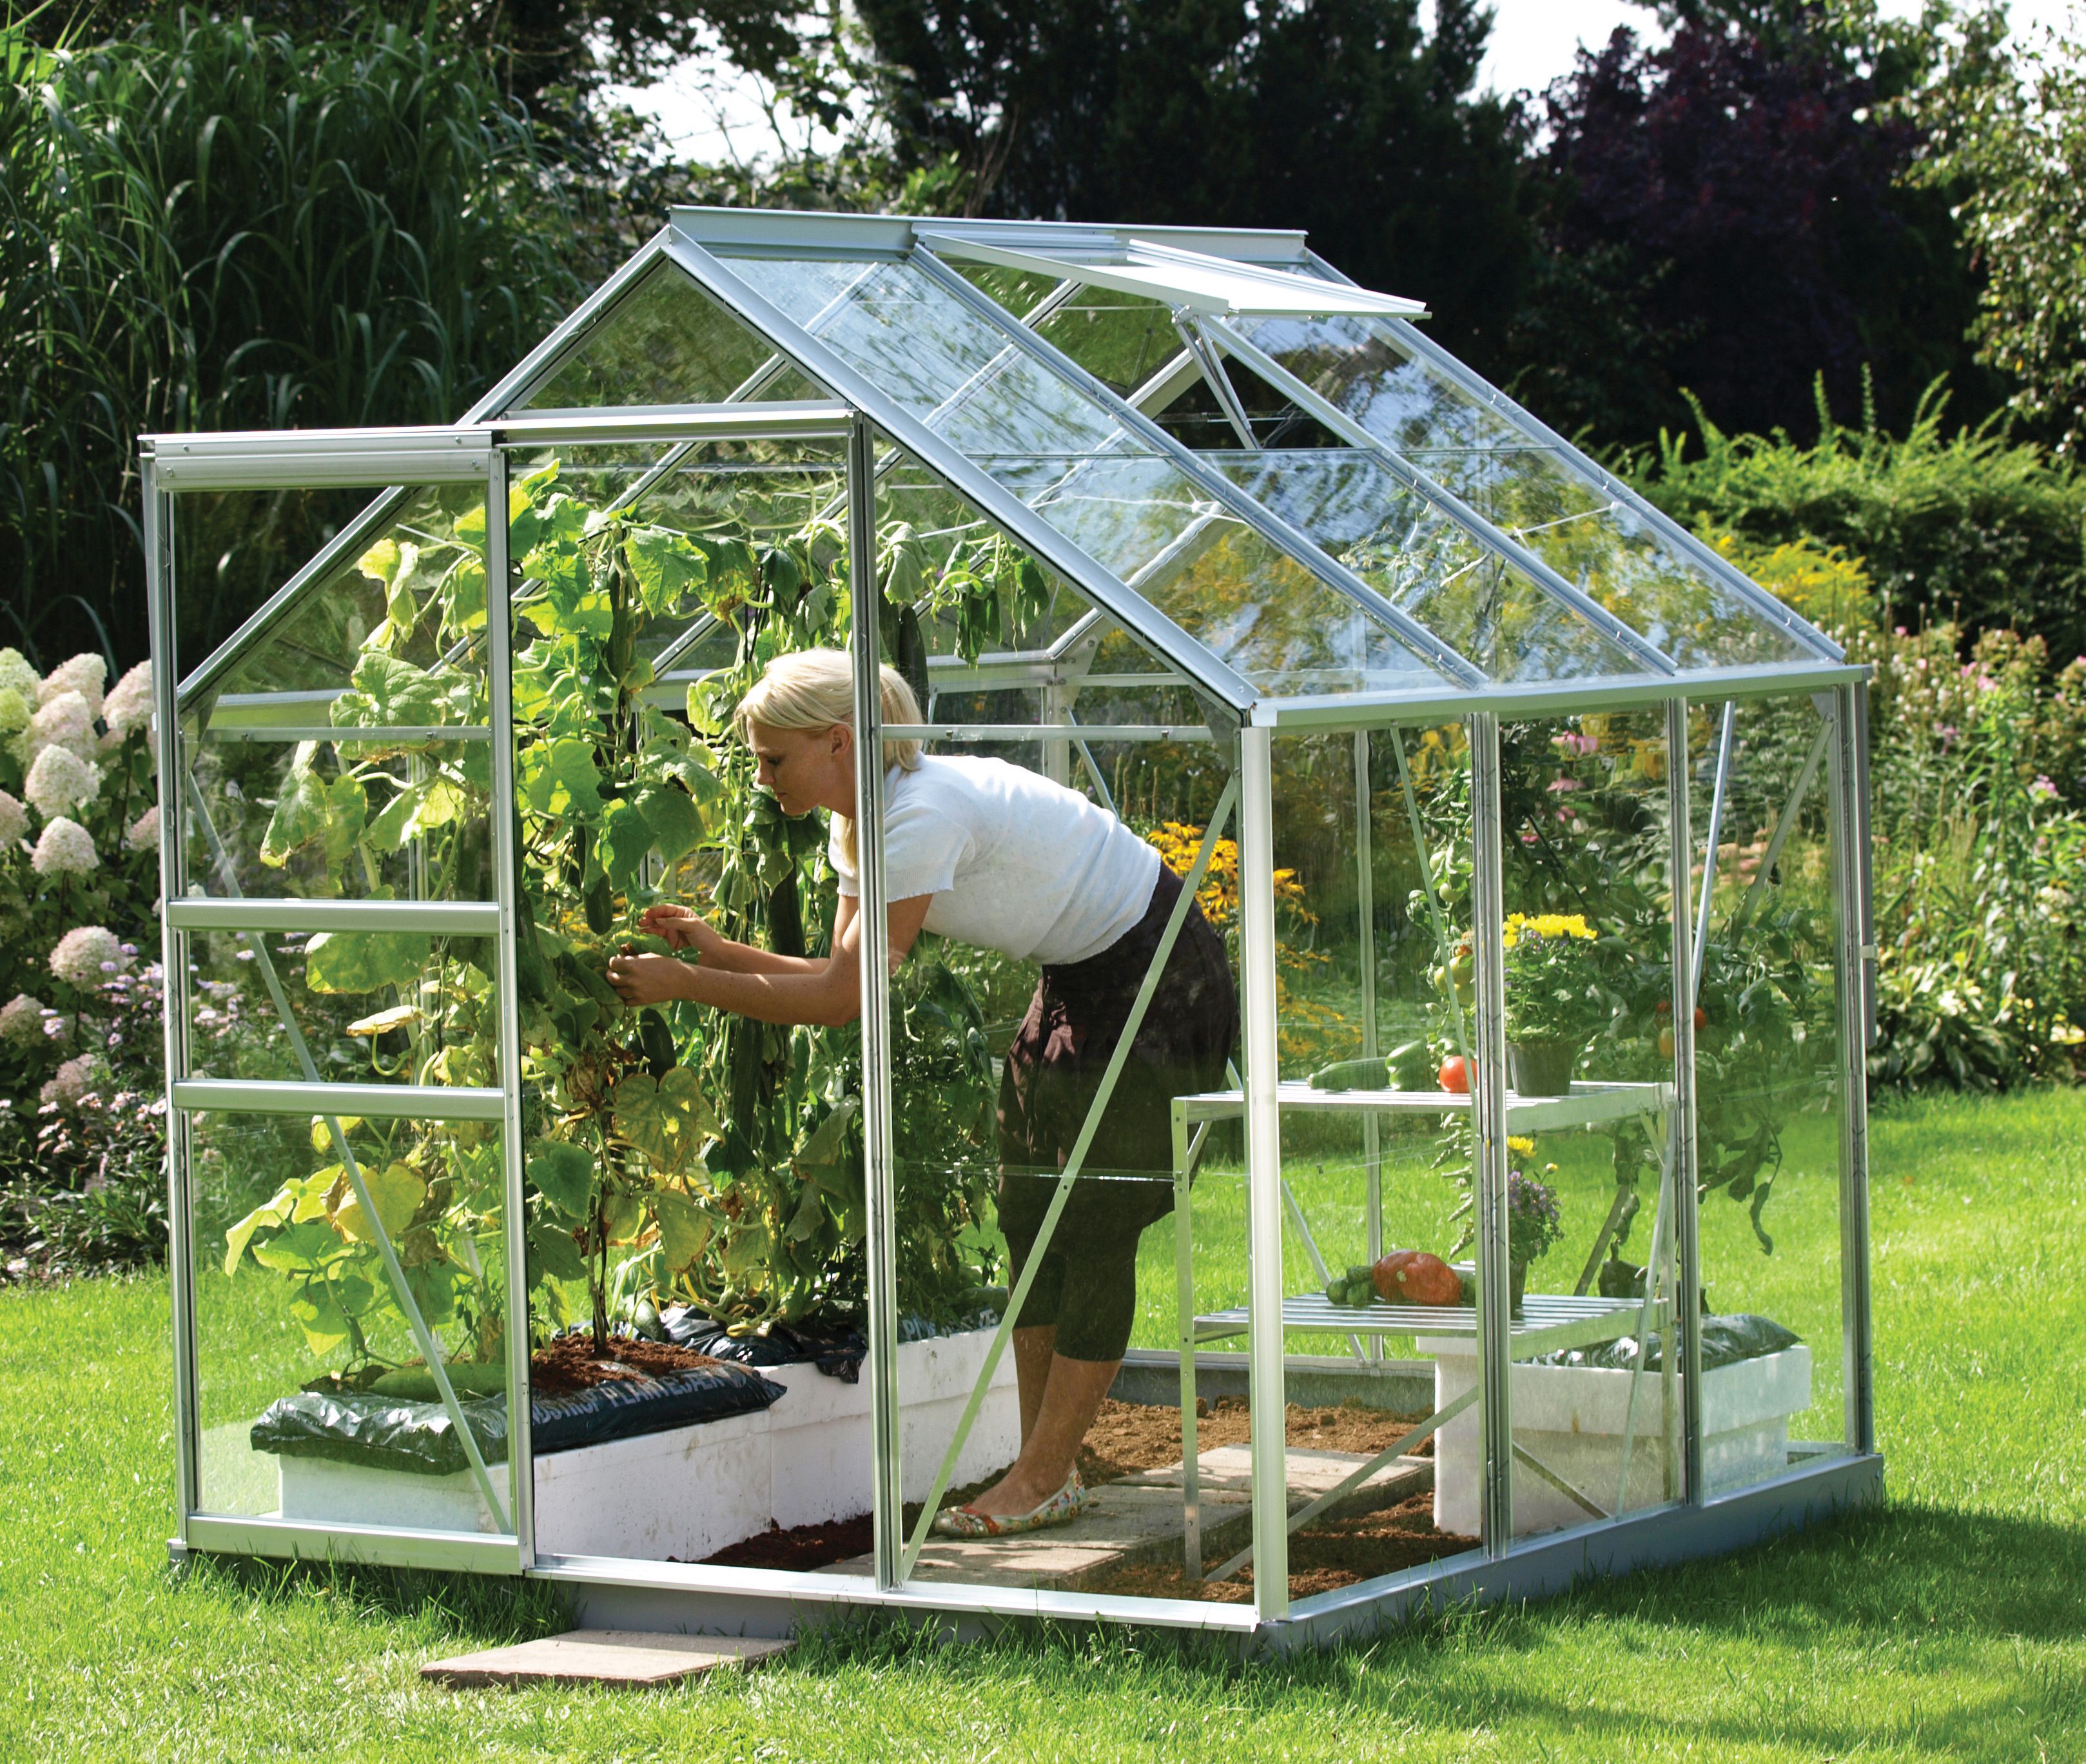 Image of Vitavia Venus 6 x 6ft Horticultural Glass Greenhouse with Steel Base